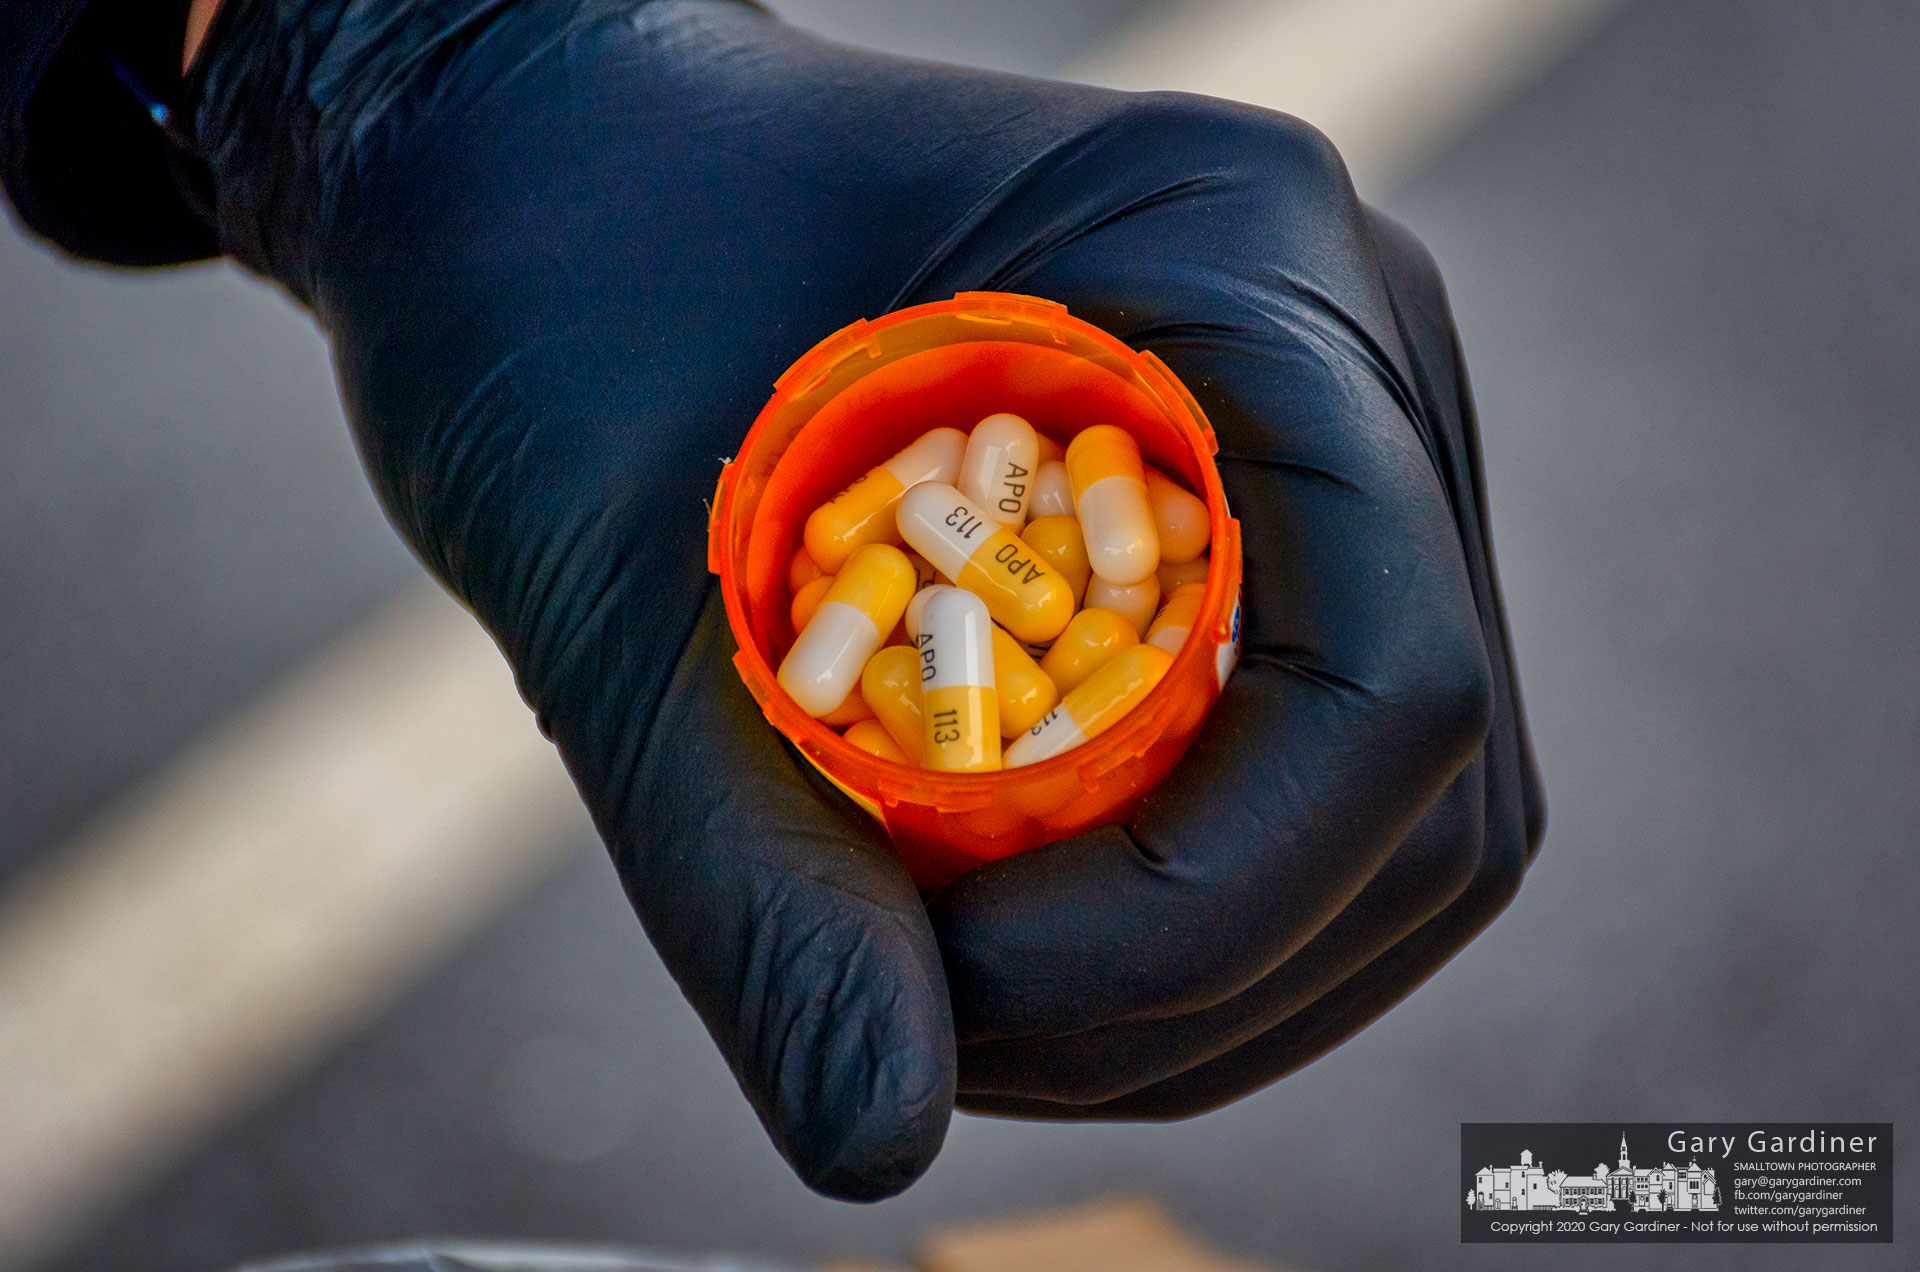 A gloved Blendon Township police officer prepares to drop a bottle of drugs into a holding container for disposal during Drug Disposal Day. My Final Photo for Oct. 24, 2020.